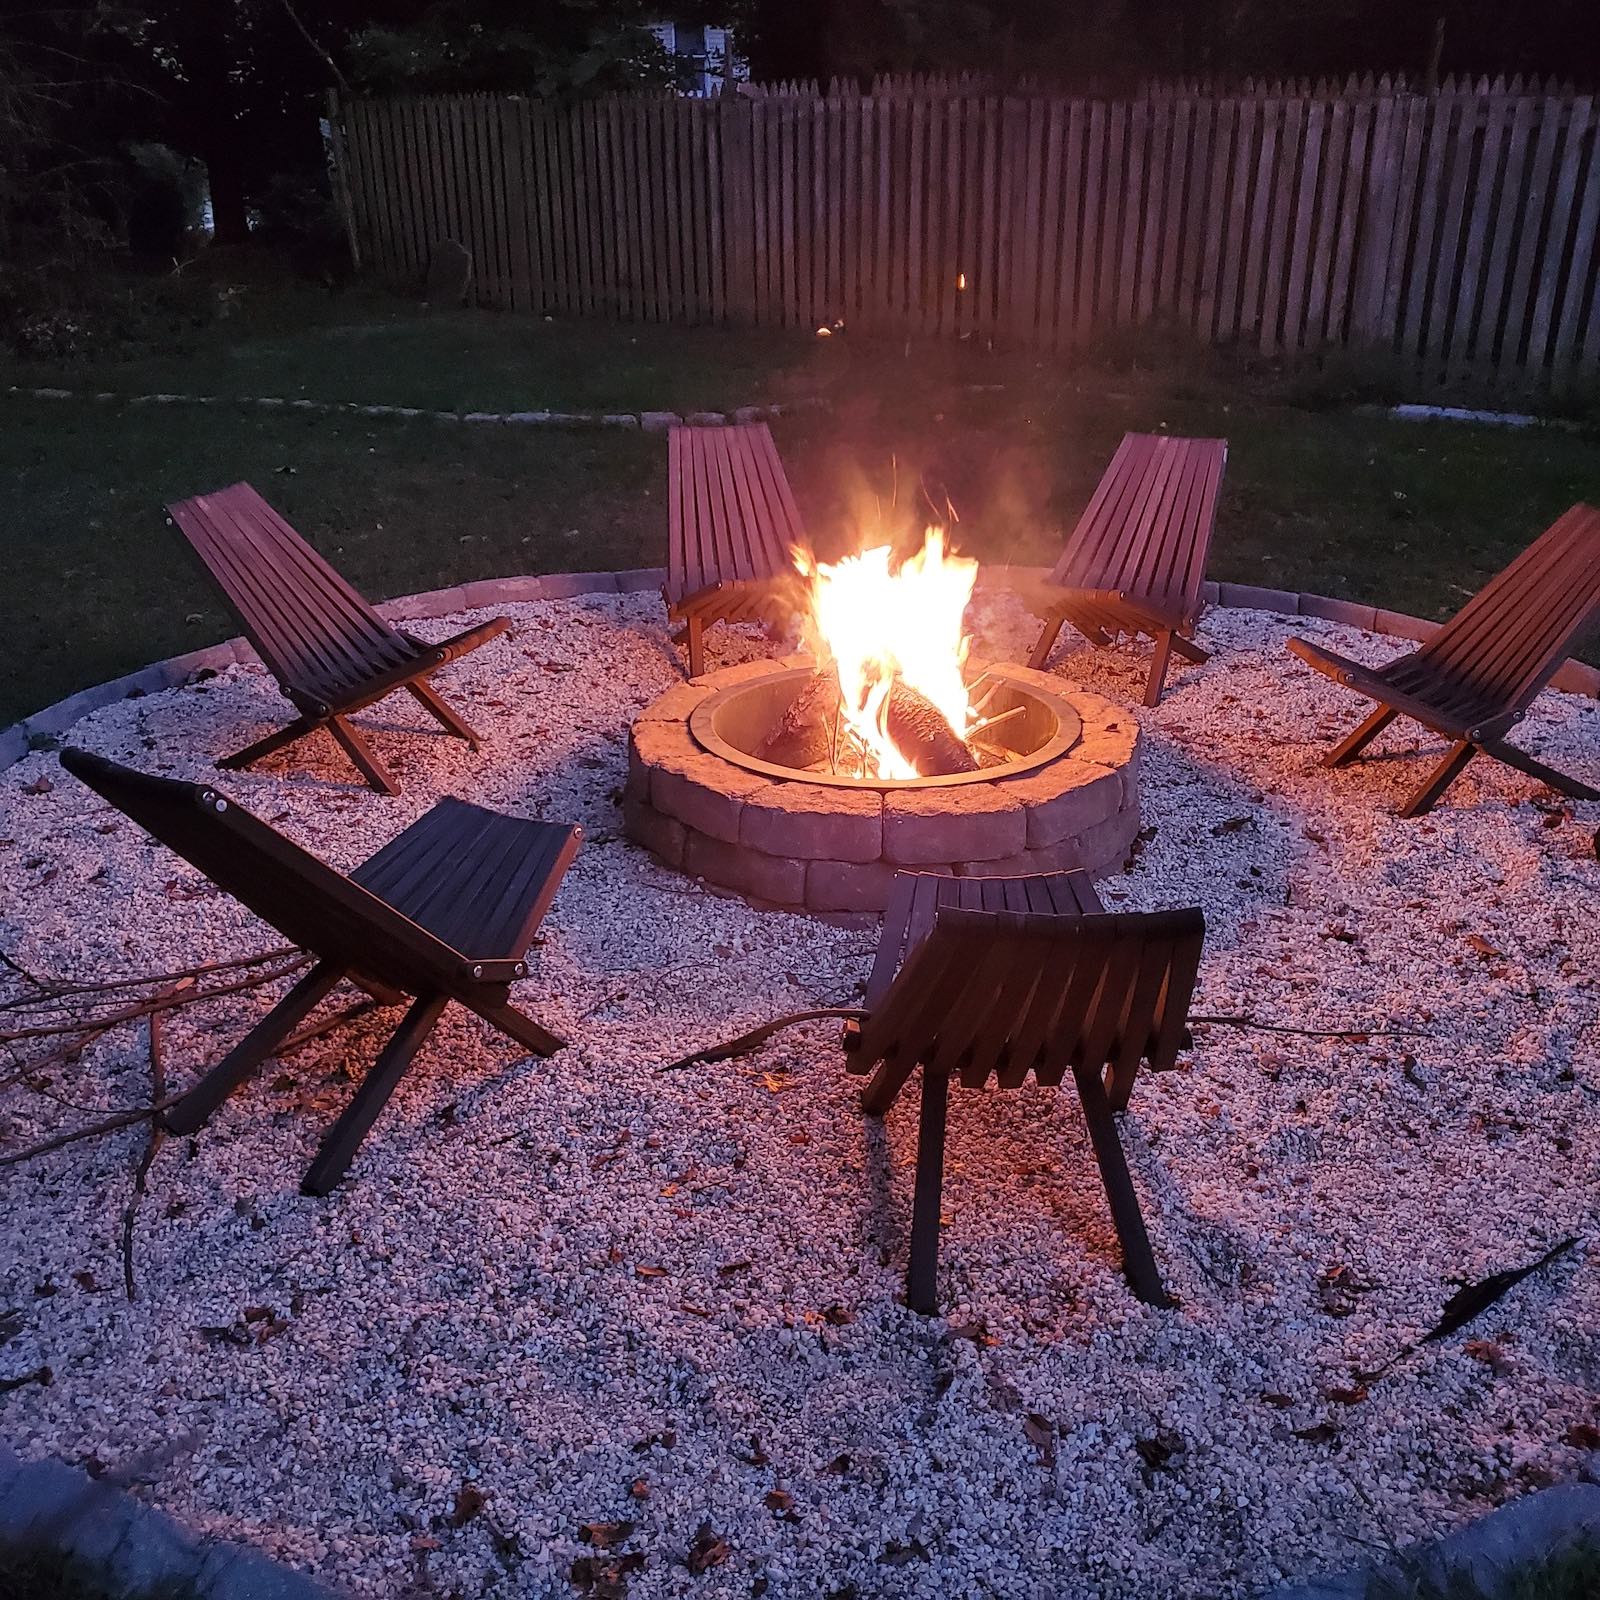 10 Questions to Ask Before Starting a FIRE This Summer - Before you install a fire pit in your backyard, always make sure that someone is keeping an eye on the fire. Never walk away. - Thrift Diving